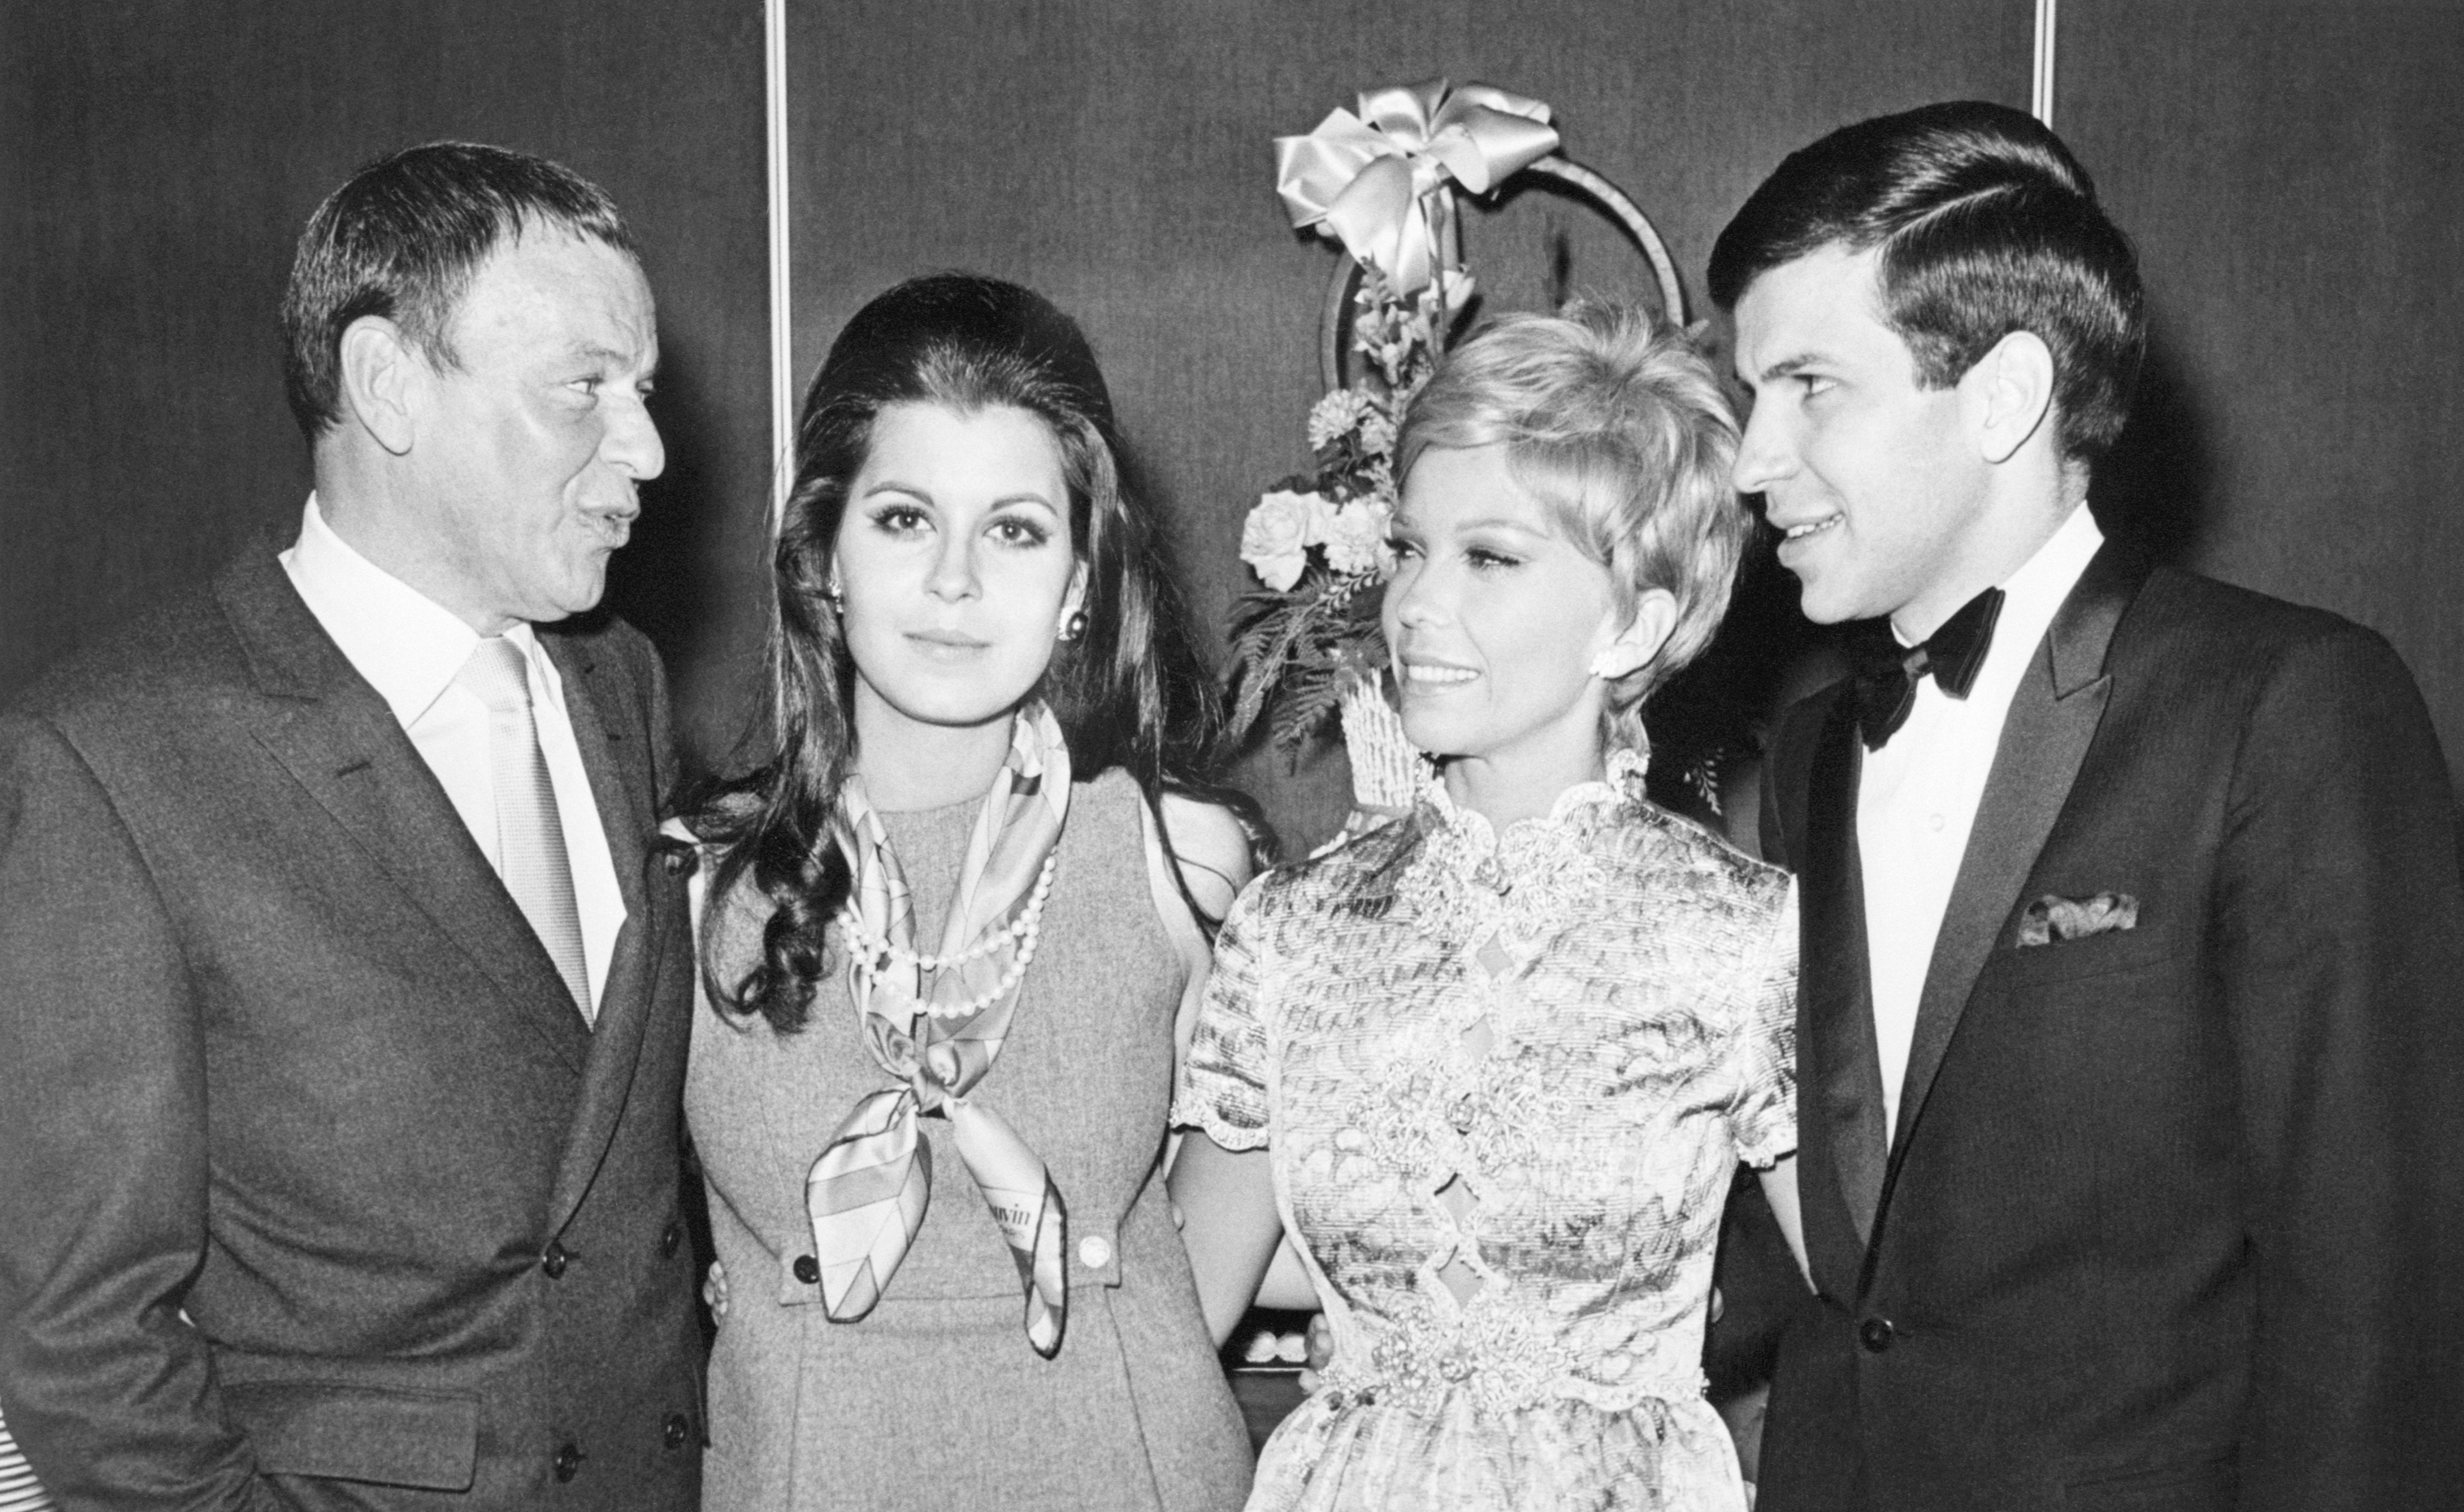 A black and white photo of Frank Sinatra and his daughters Tina and Nancy, and his son Frank, standing with their arms together.